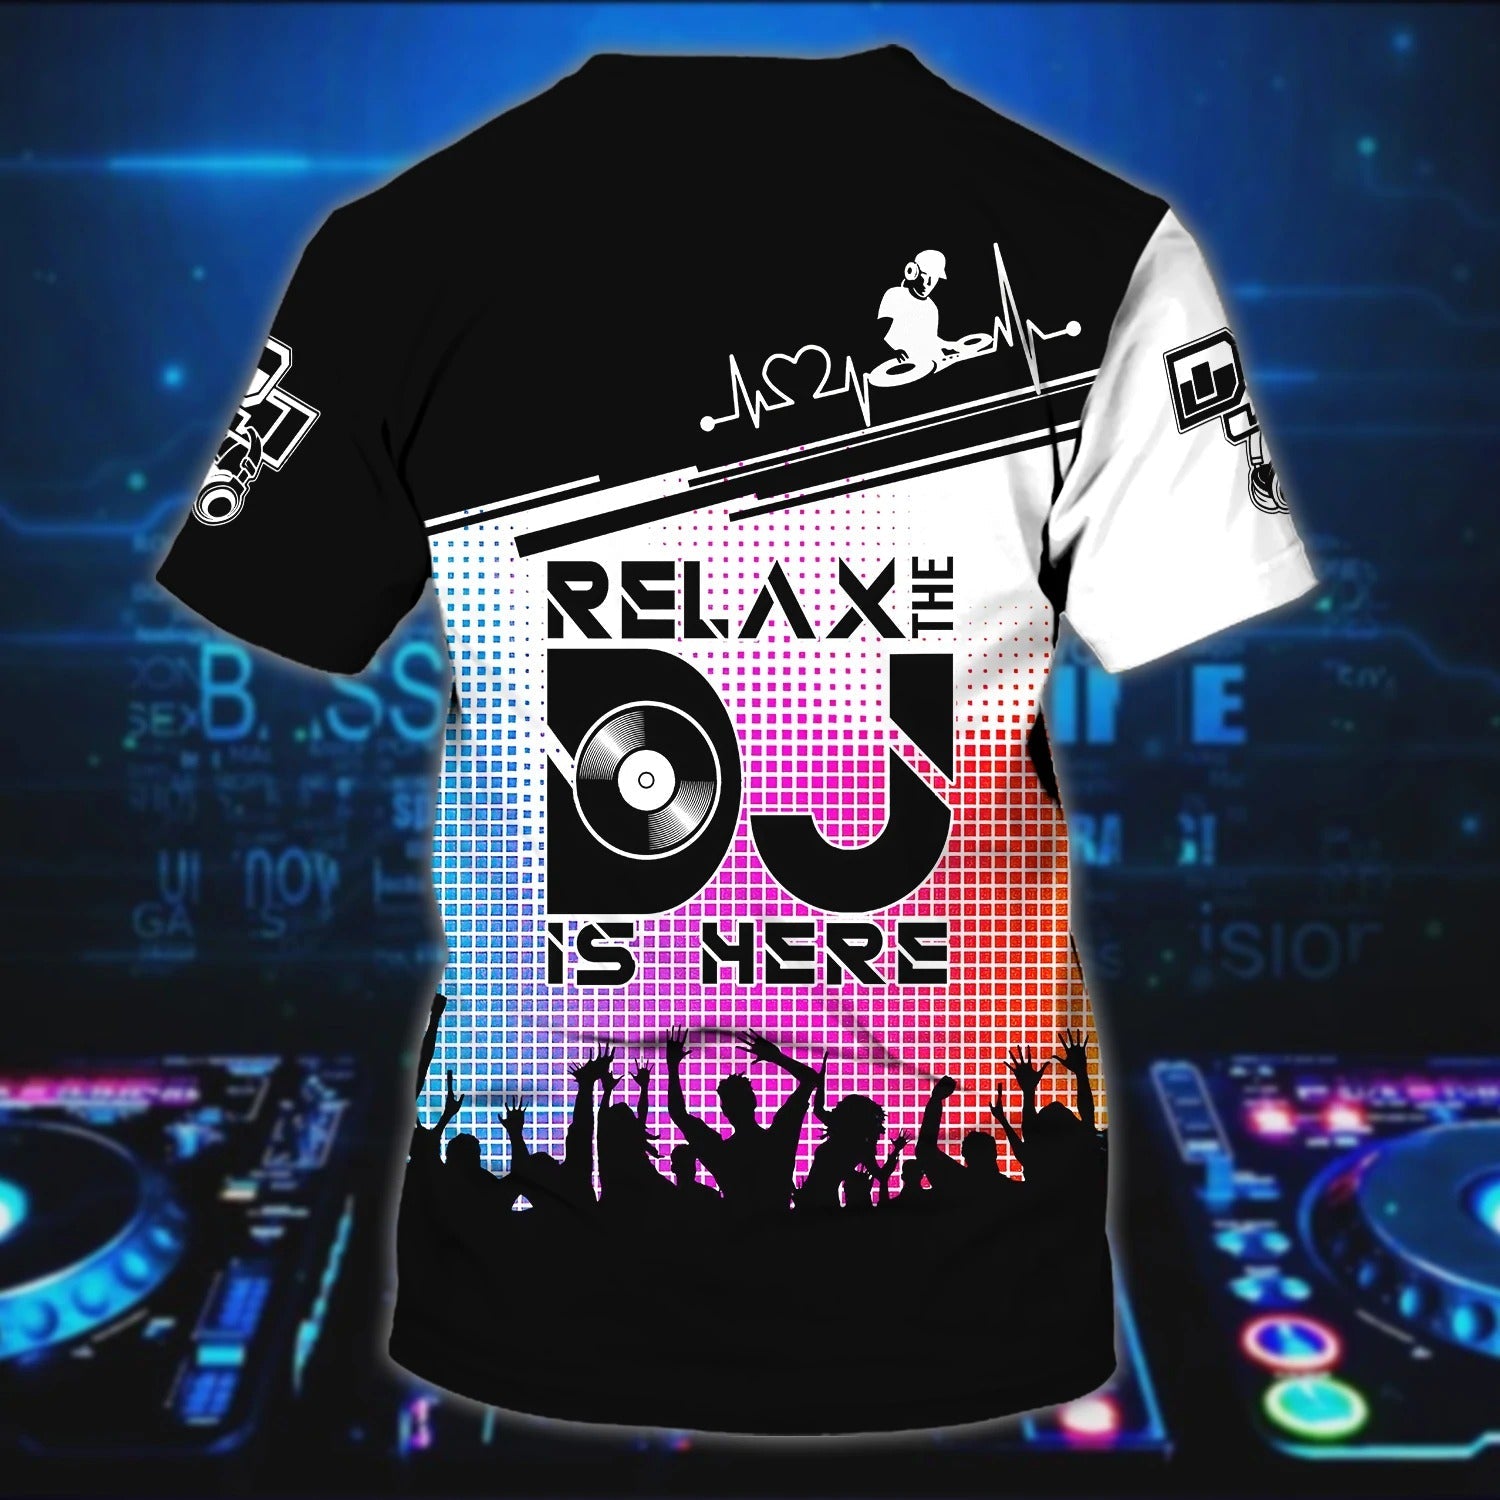 Personalized 3D All Over Printed Dj Shirts For Men And Women/ Funny Gift For A Dj/ Disc Jockey Shirts